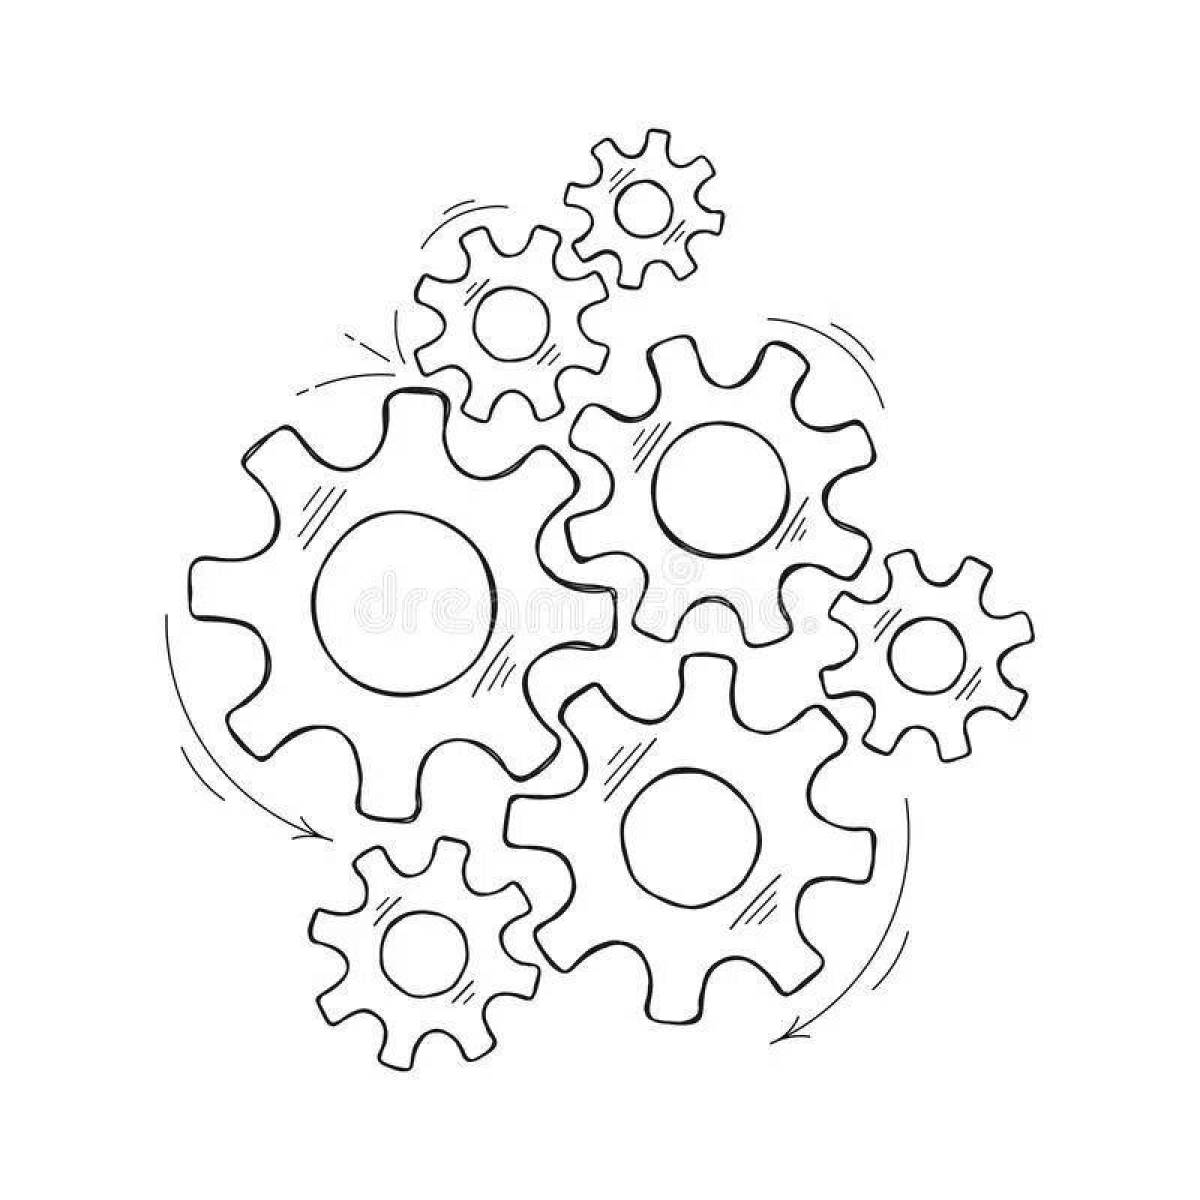 Coloring gears